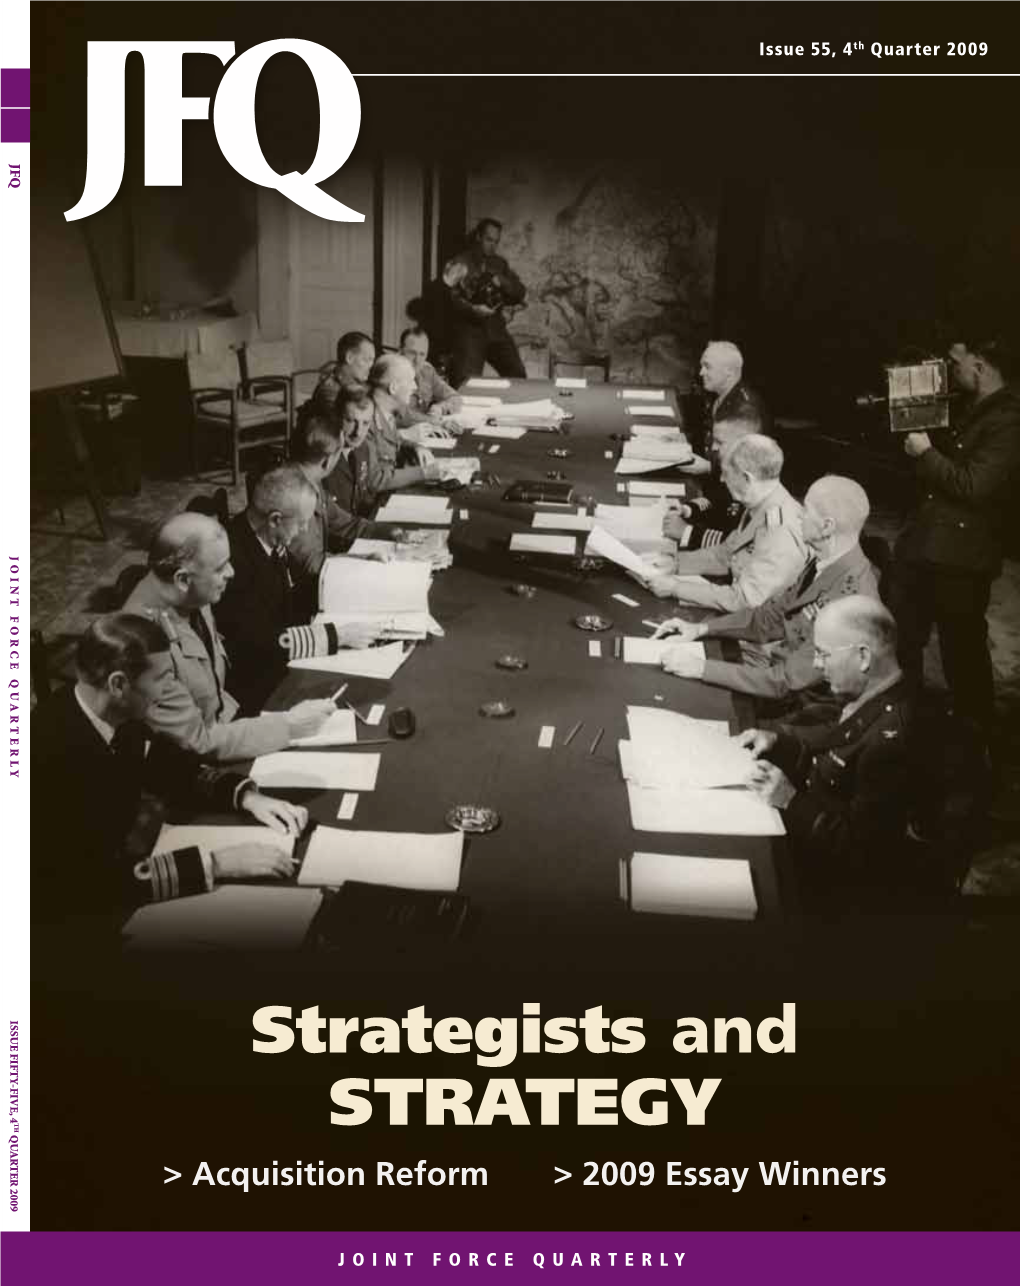 JFQ 55 FORUM | Options for U.S.-Russian Strategic Arms Reductions